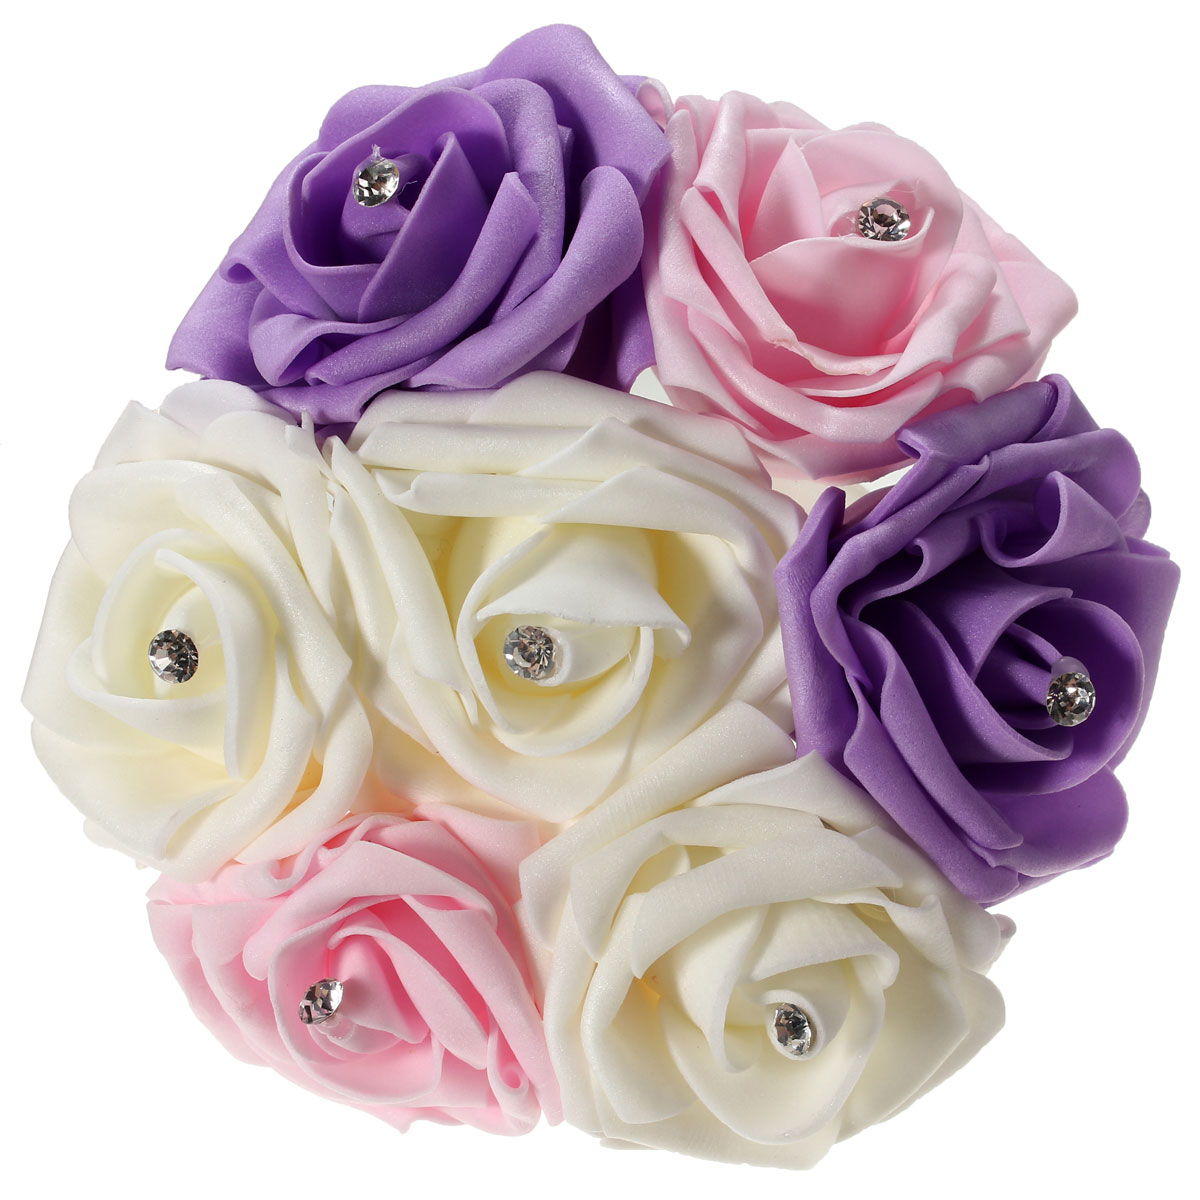 7-Heads-Colourfast-Foam-Roses-Crystal-Artificial-Flower-Home-Wedding-Bride-Bouquet-Party-Decoration-1026818